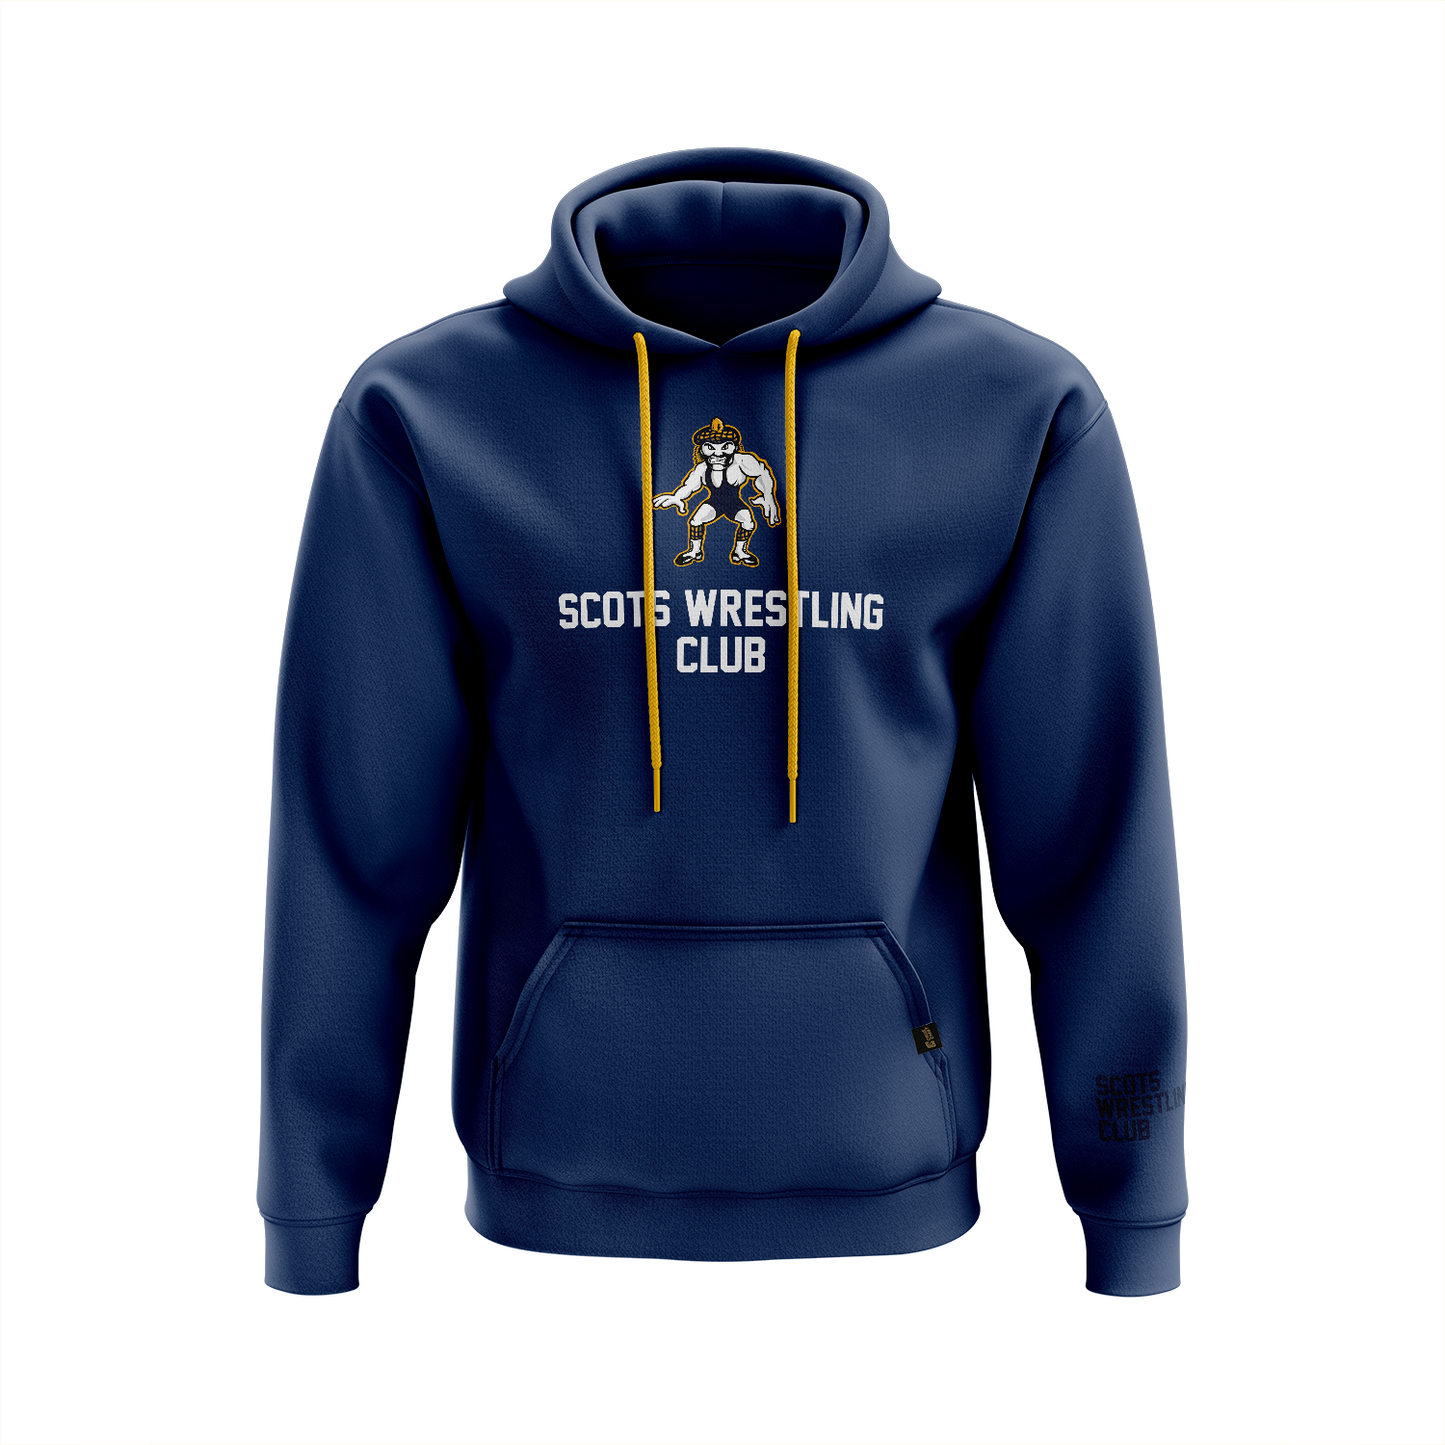 Scots Wrestling Club pullover hoodie Standard Issue, navy